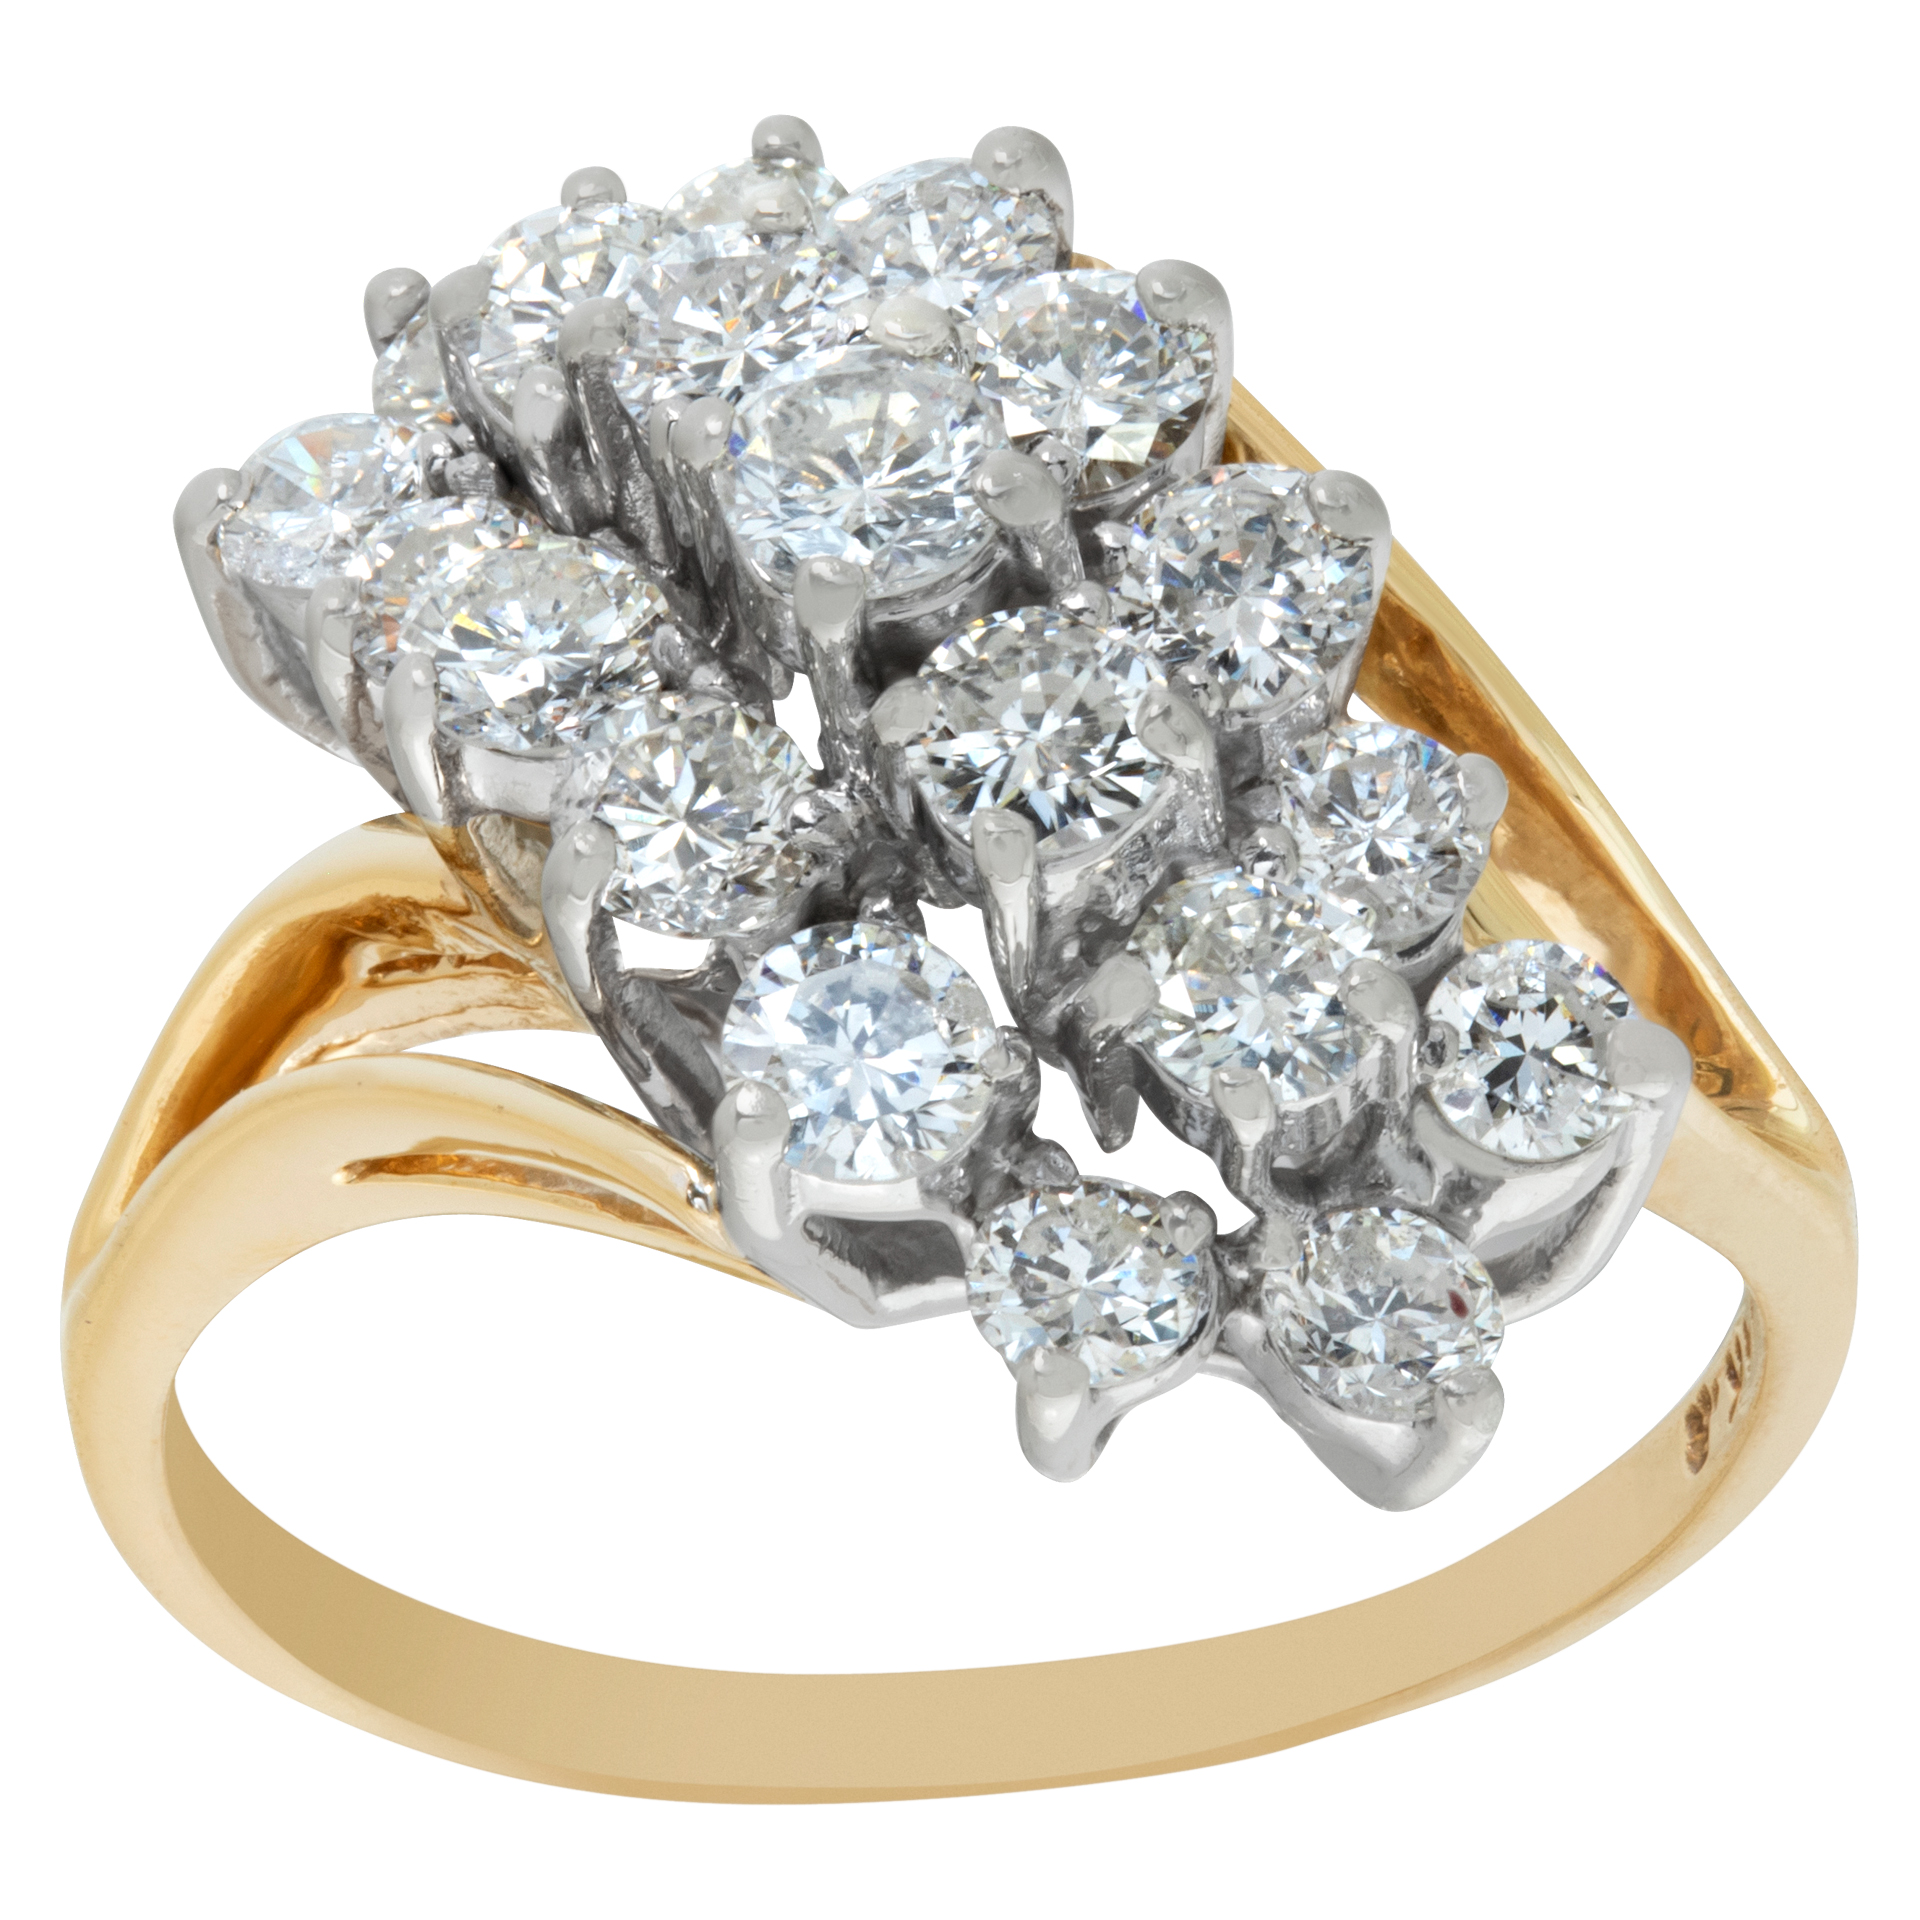 Diamond ring in 14k white and yellow gold